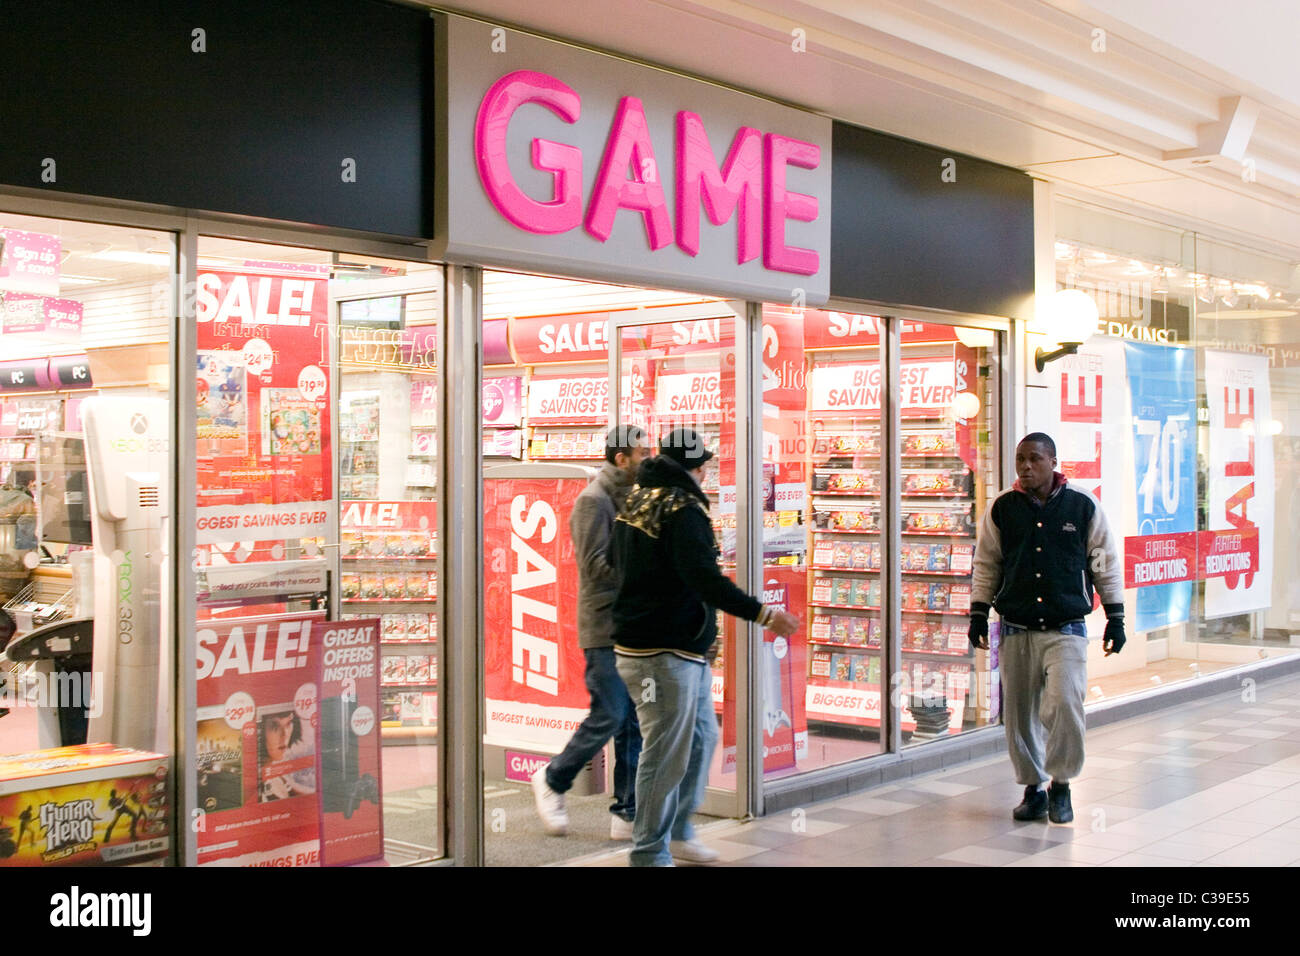 A Game store in North London Stock Photo